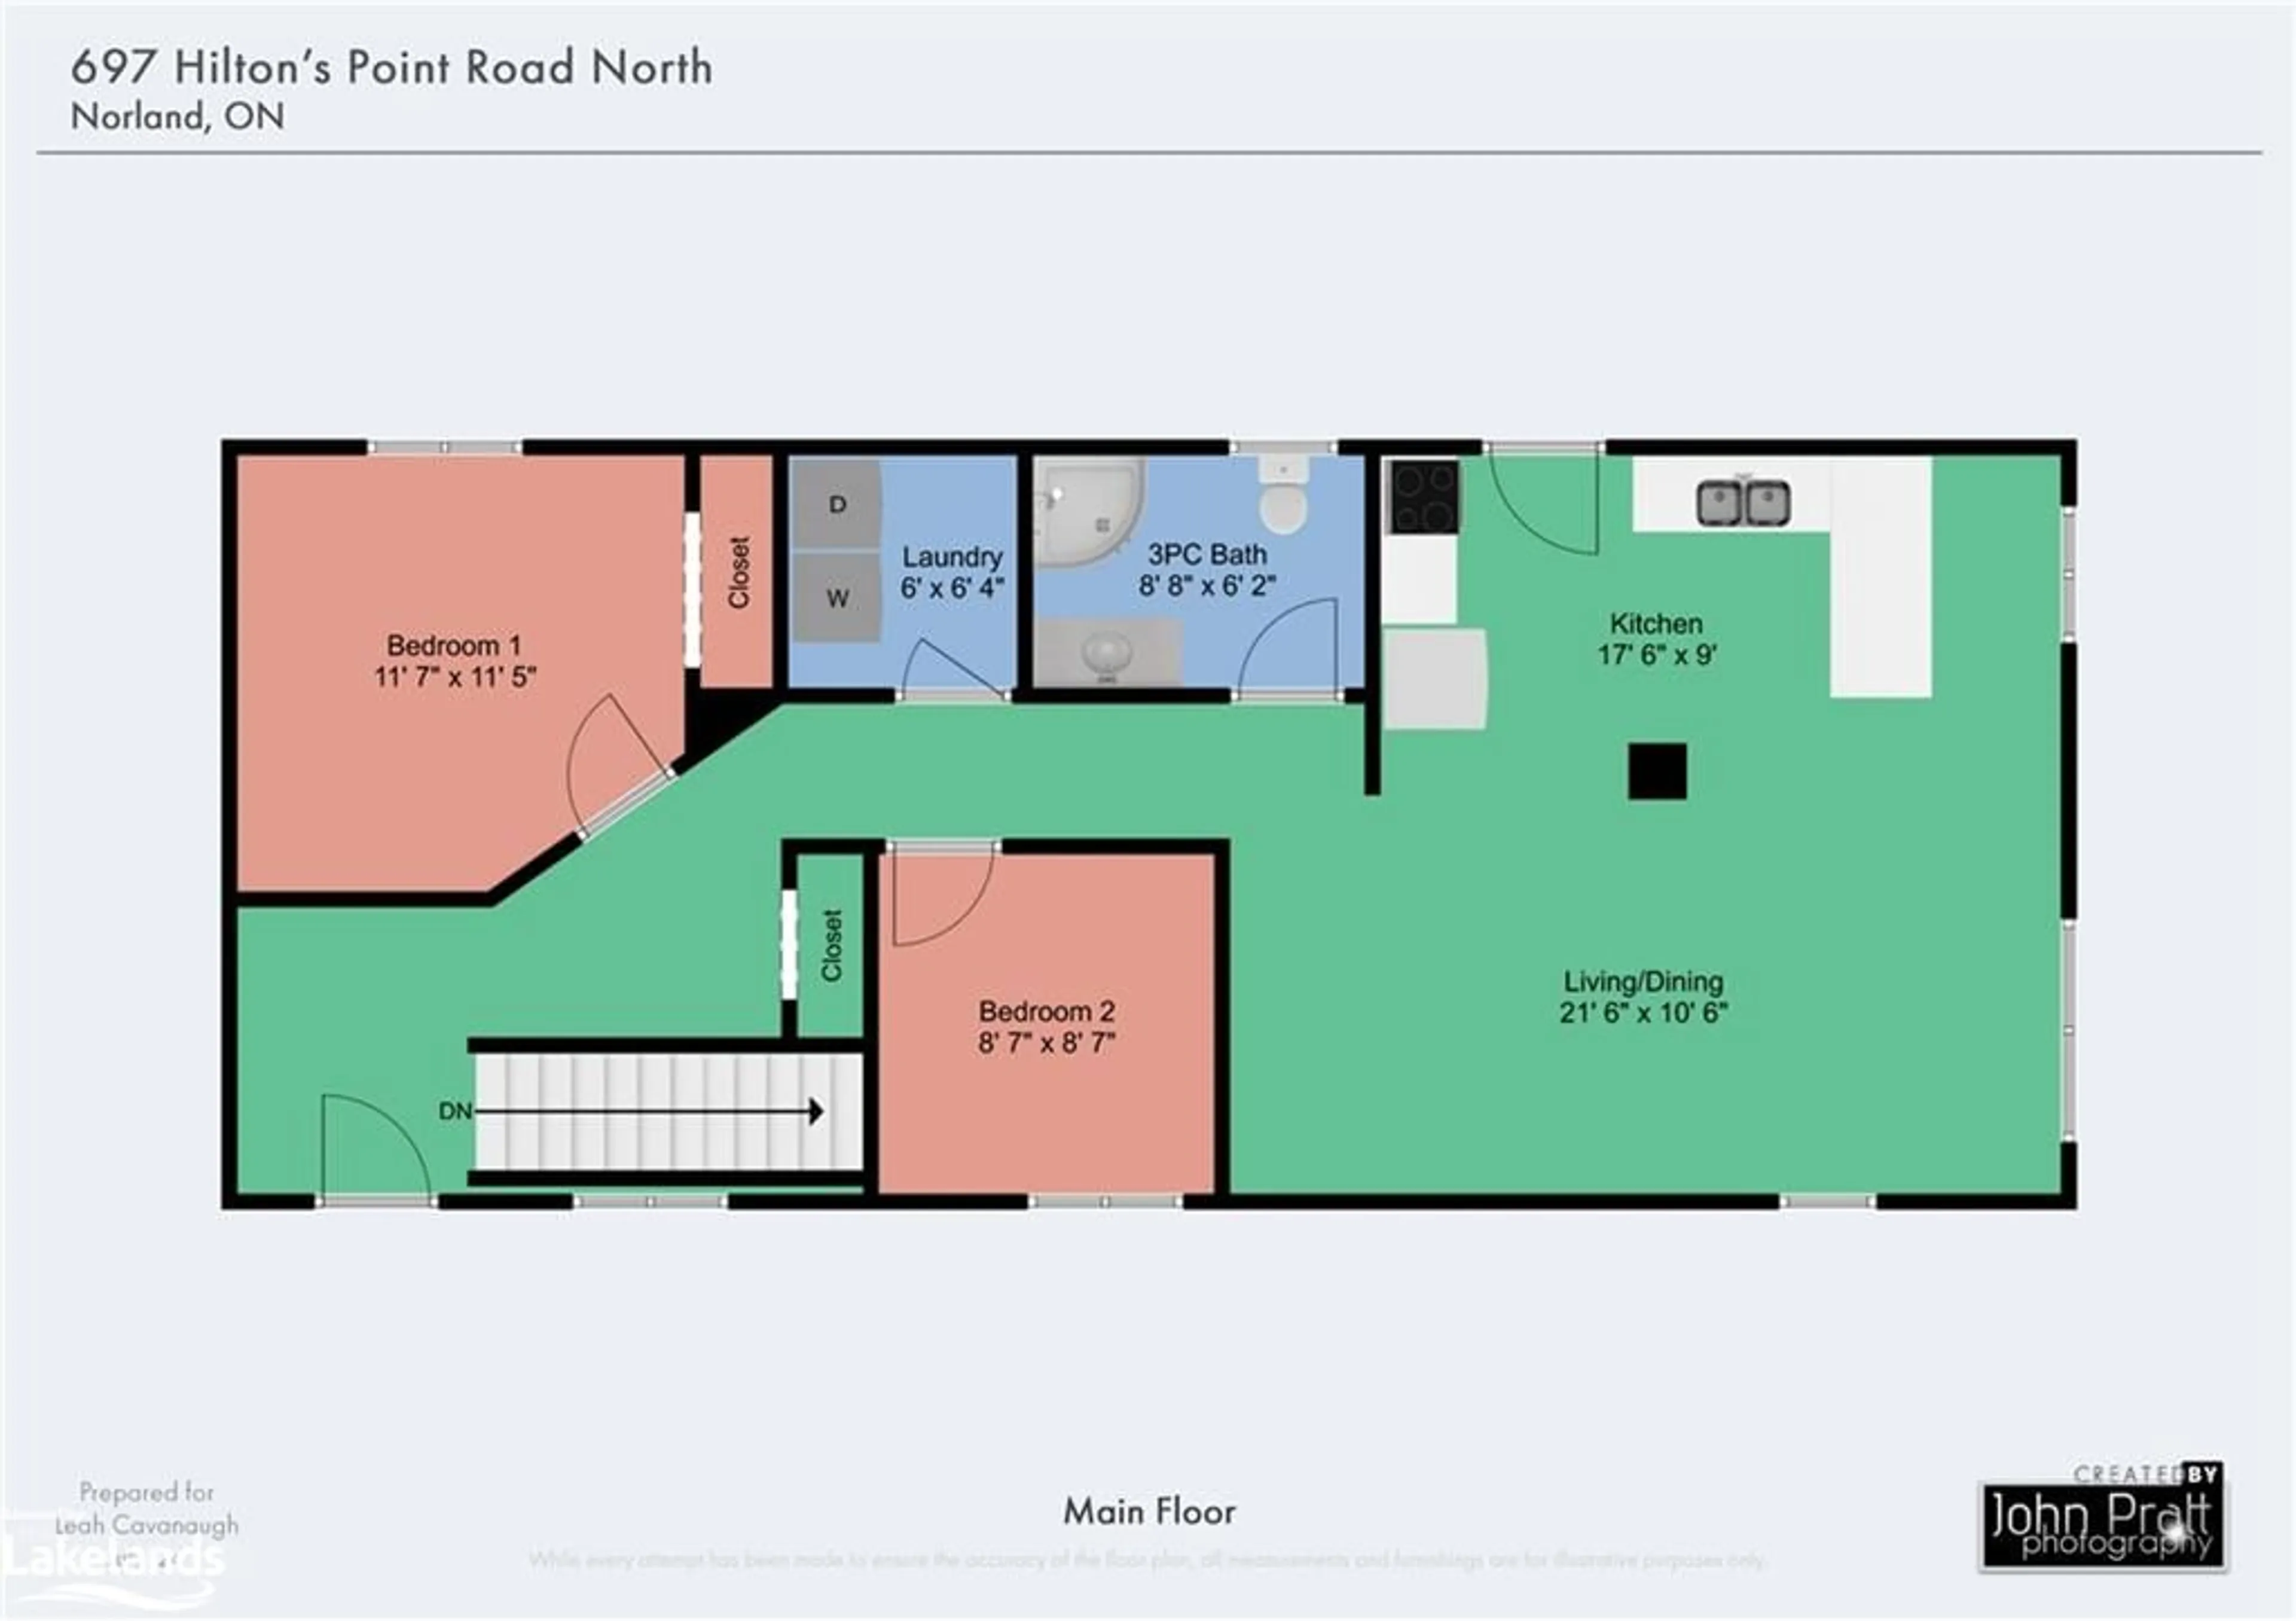 Floor plan for 697 Hilton's Point Rd, Norland Ontario K0M 2L0